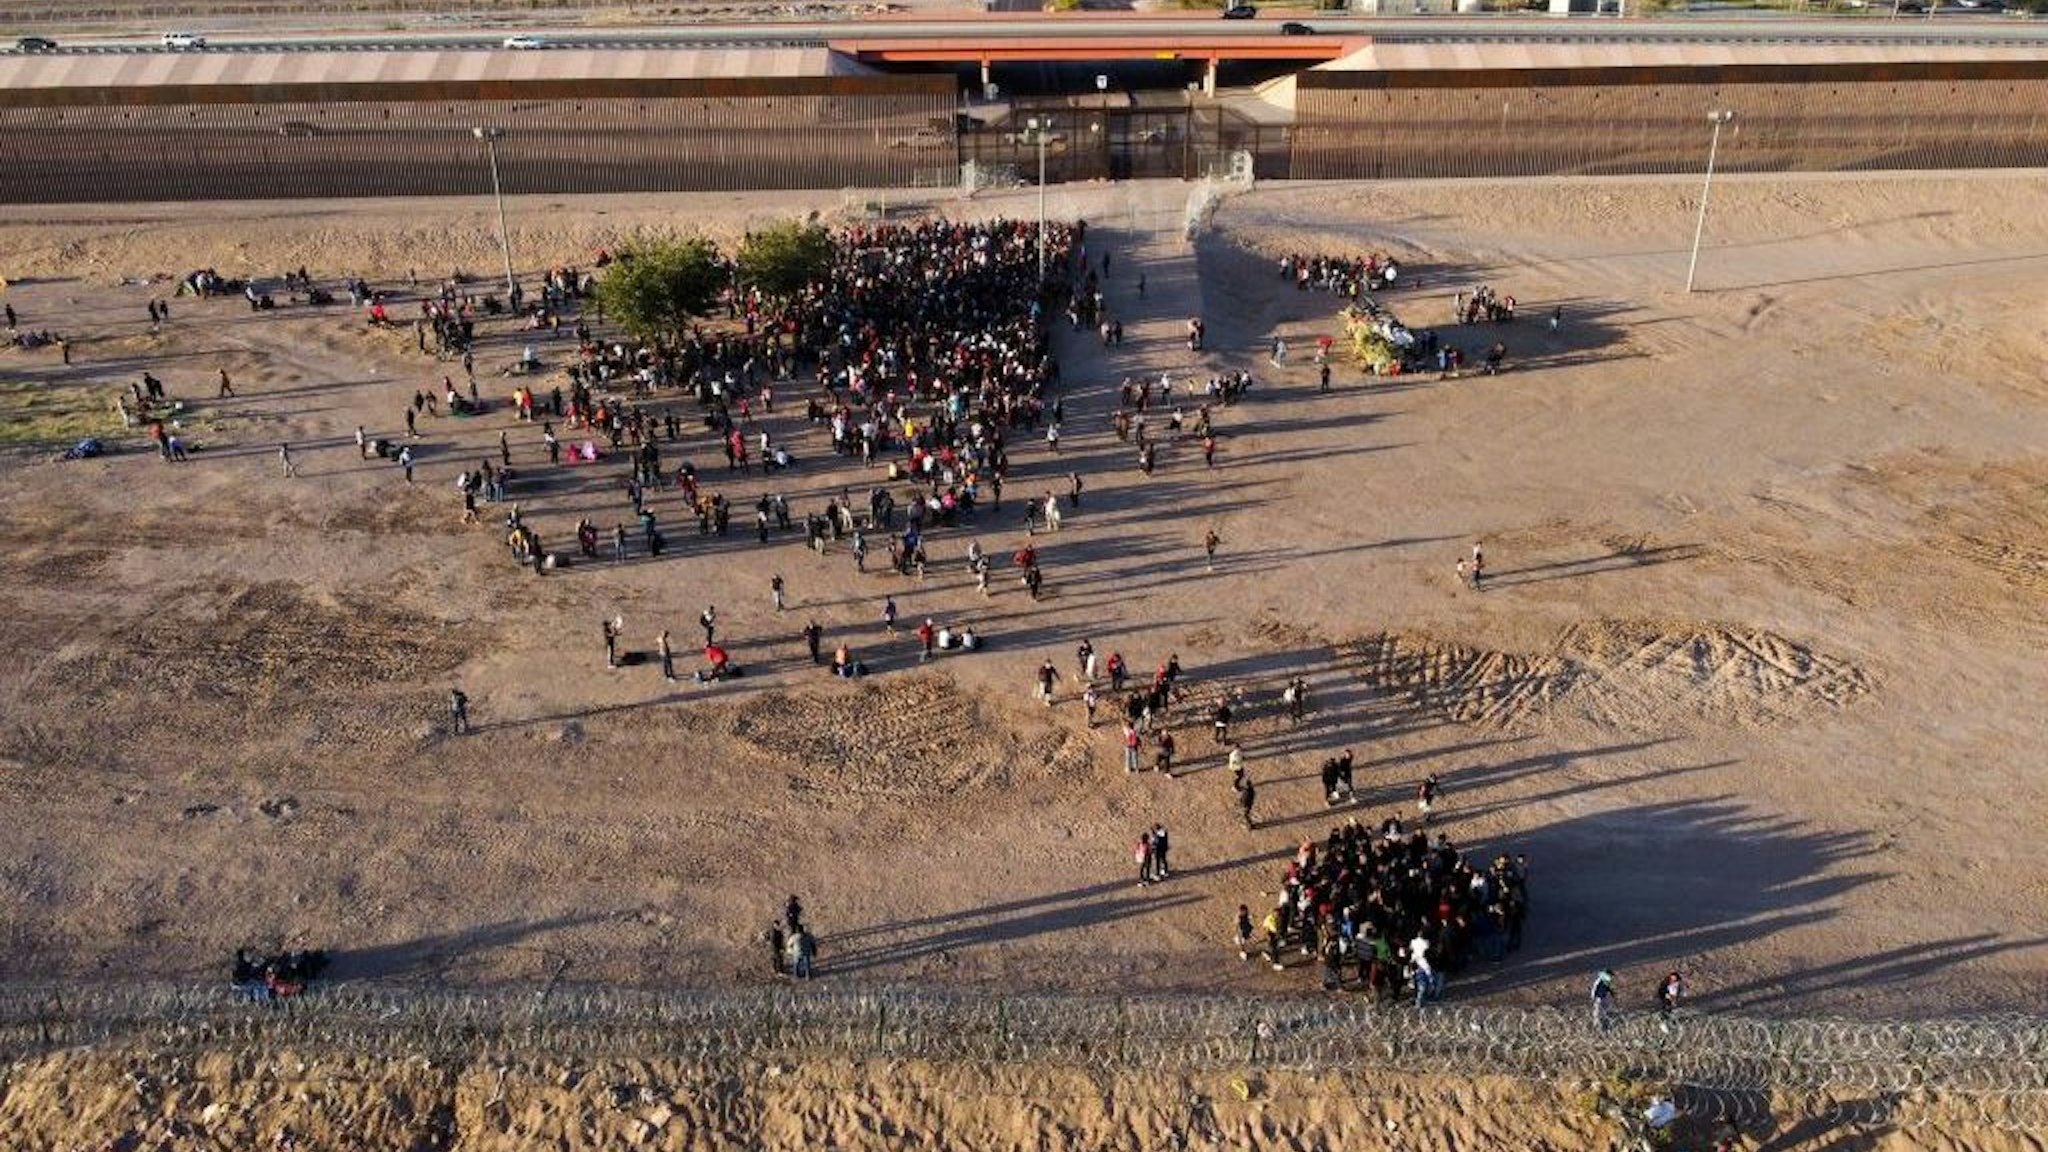 Aerial view of migrants waiting to be processed by the El Paso Sector Border Patrol at the banks of the Rio Grande River in El Paso, Texas, United States, as seen from Ciudad Juarez, Chihuahua State, Mexico, taken on May 4, 2023. Under the intense desert sun, among sand and brush, hundreds of migrants crossed the Rio Grande from Mexico on the rumor that the United States would let them in. But their hopes were dashed as they fell prey, once again, to misinformation. Falsehoods and deceptions add to the ordeal of these people, first to reach the border through Mexico and then to obtain asylum in the United States. (Photo by HERIKA MARTINEZ / AFP) (Photo by HERIKA MARTINEZ/AFP via Getty Images)